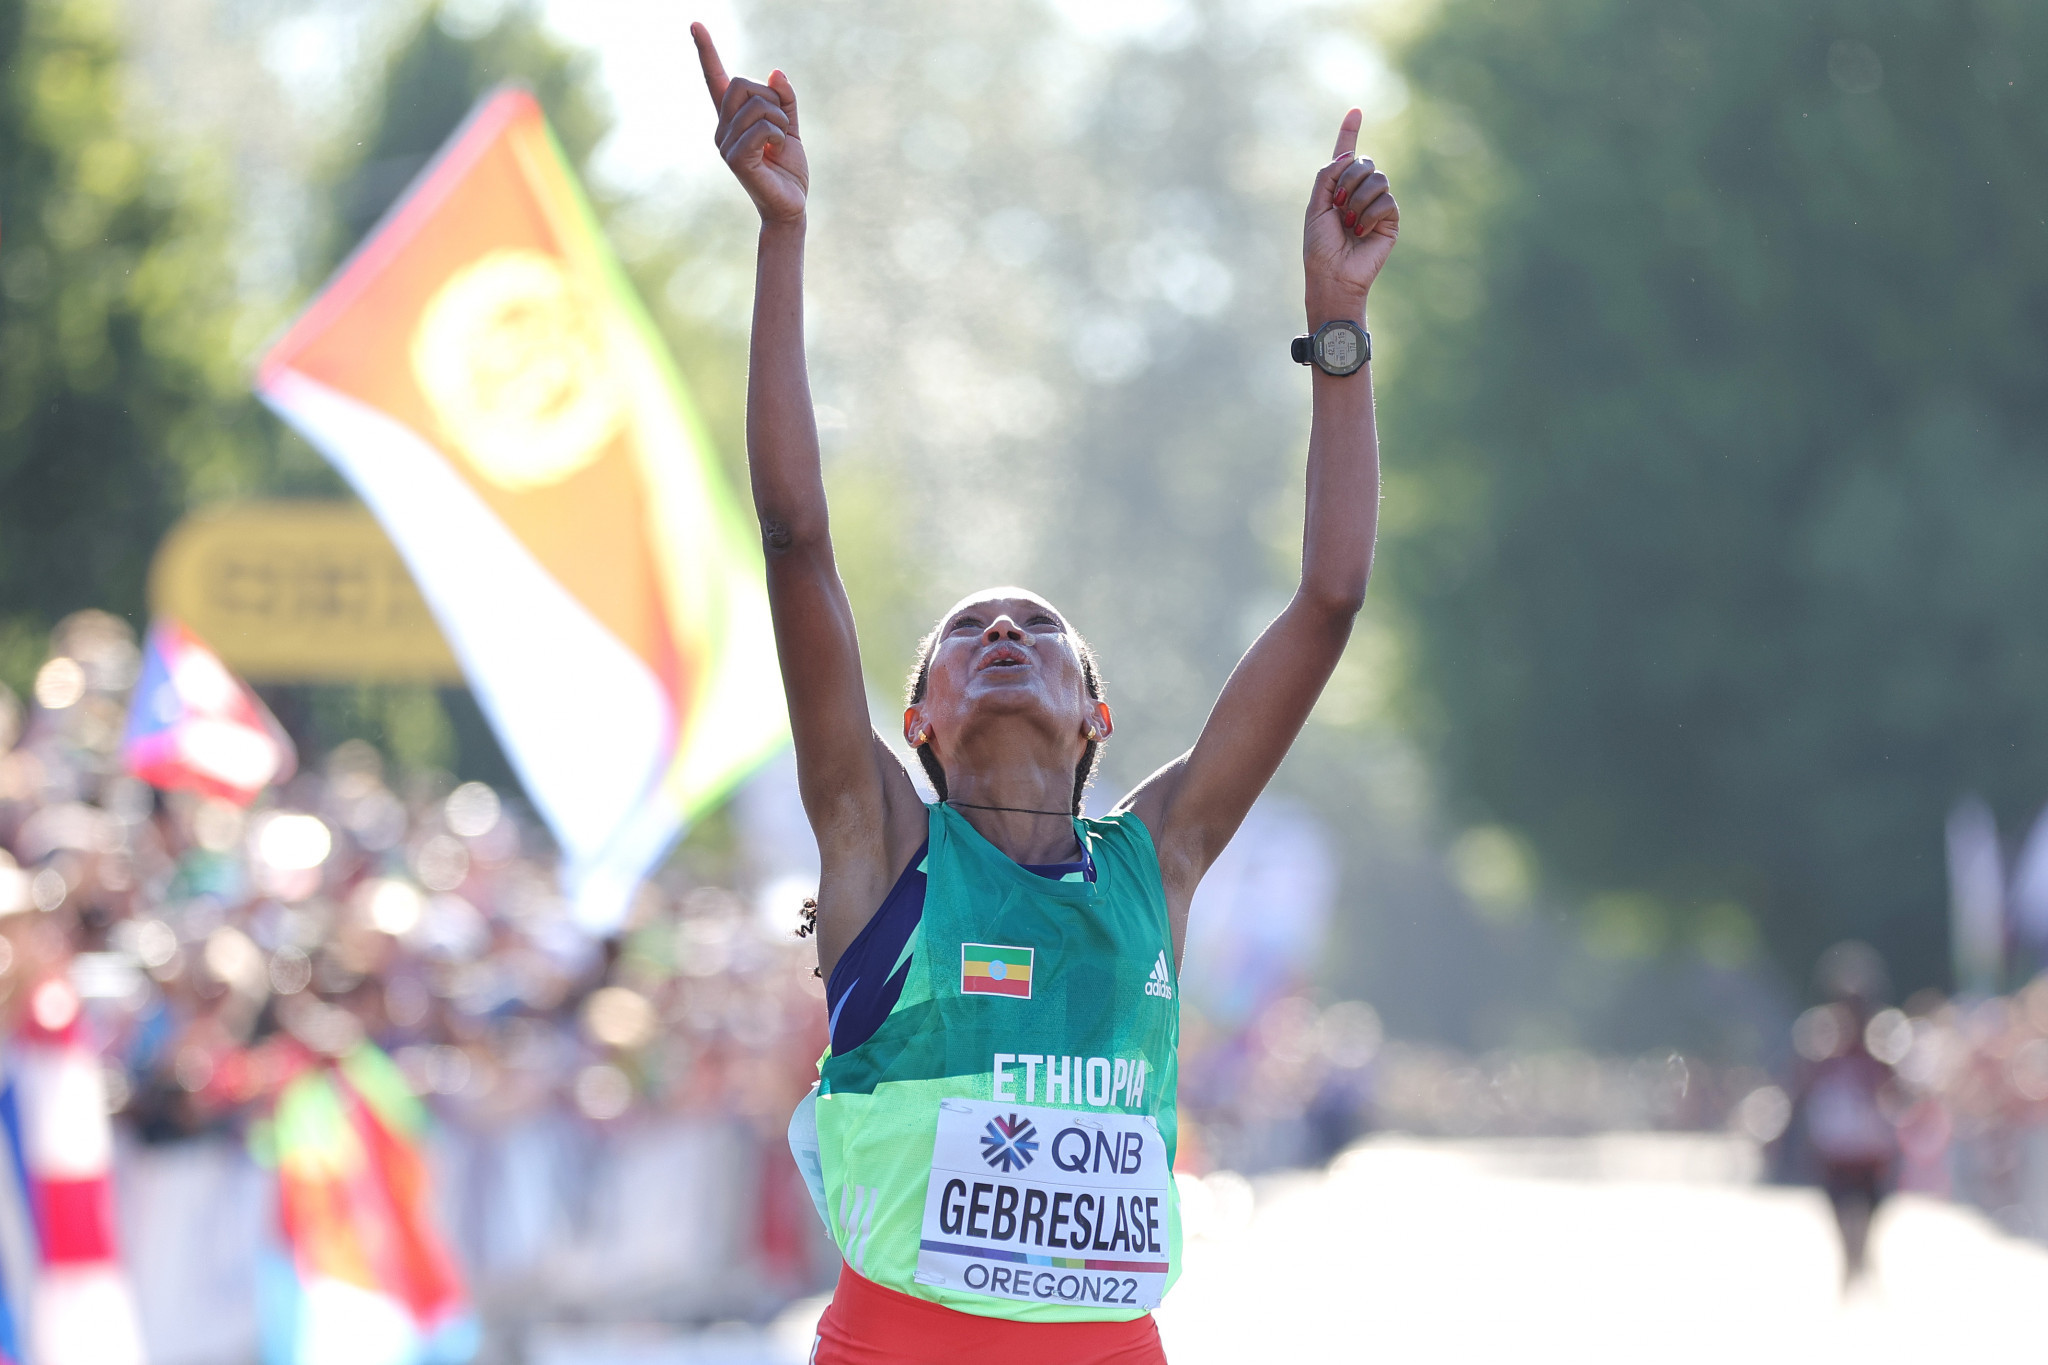 Gebreslase has yet to qualify for the Paris 2024 Olympic Games in the marathon. GETTY IMAGES